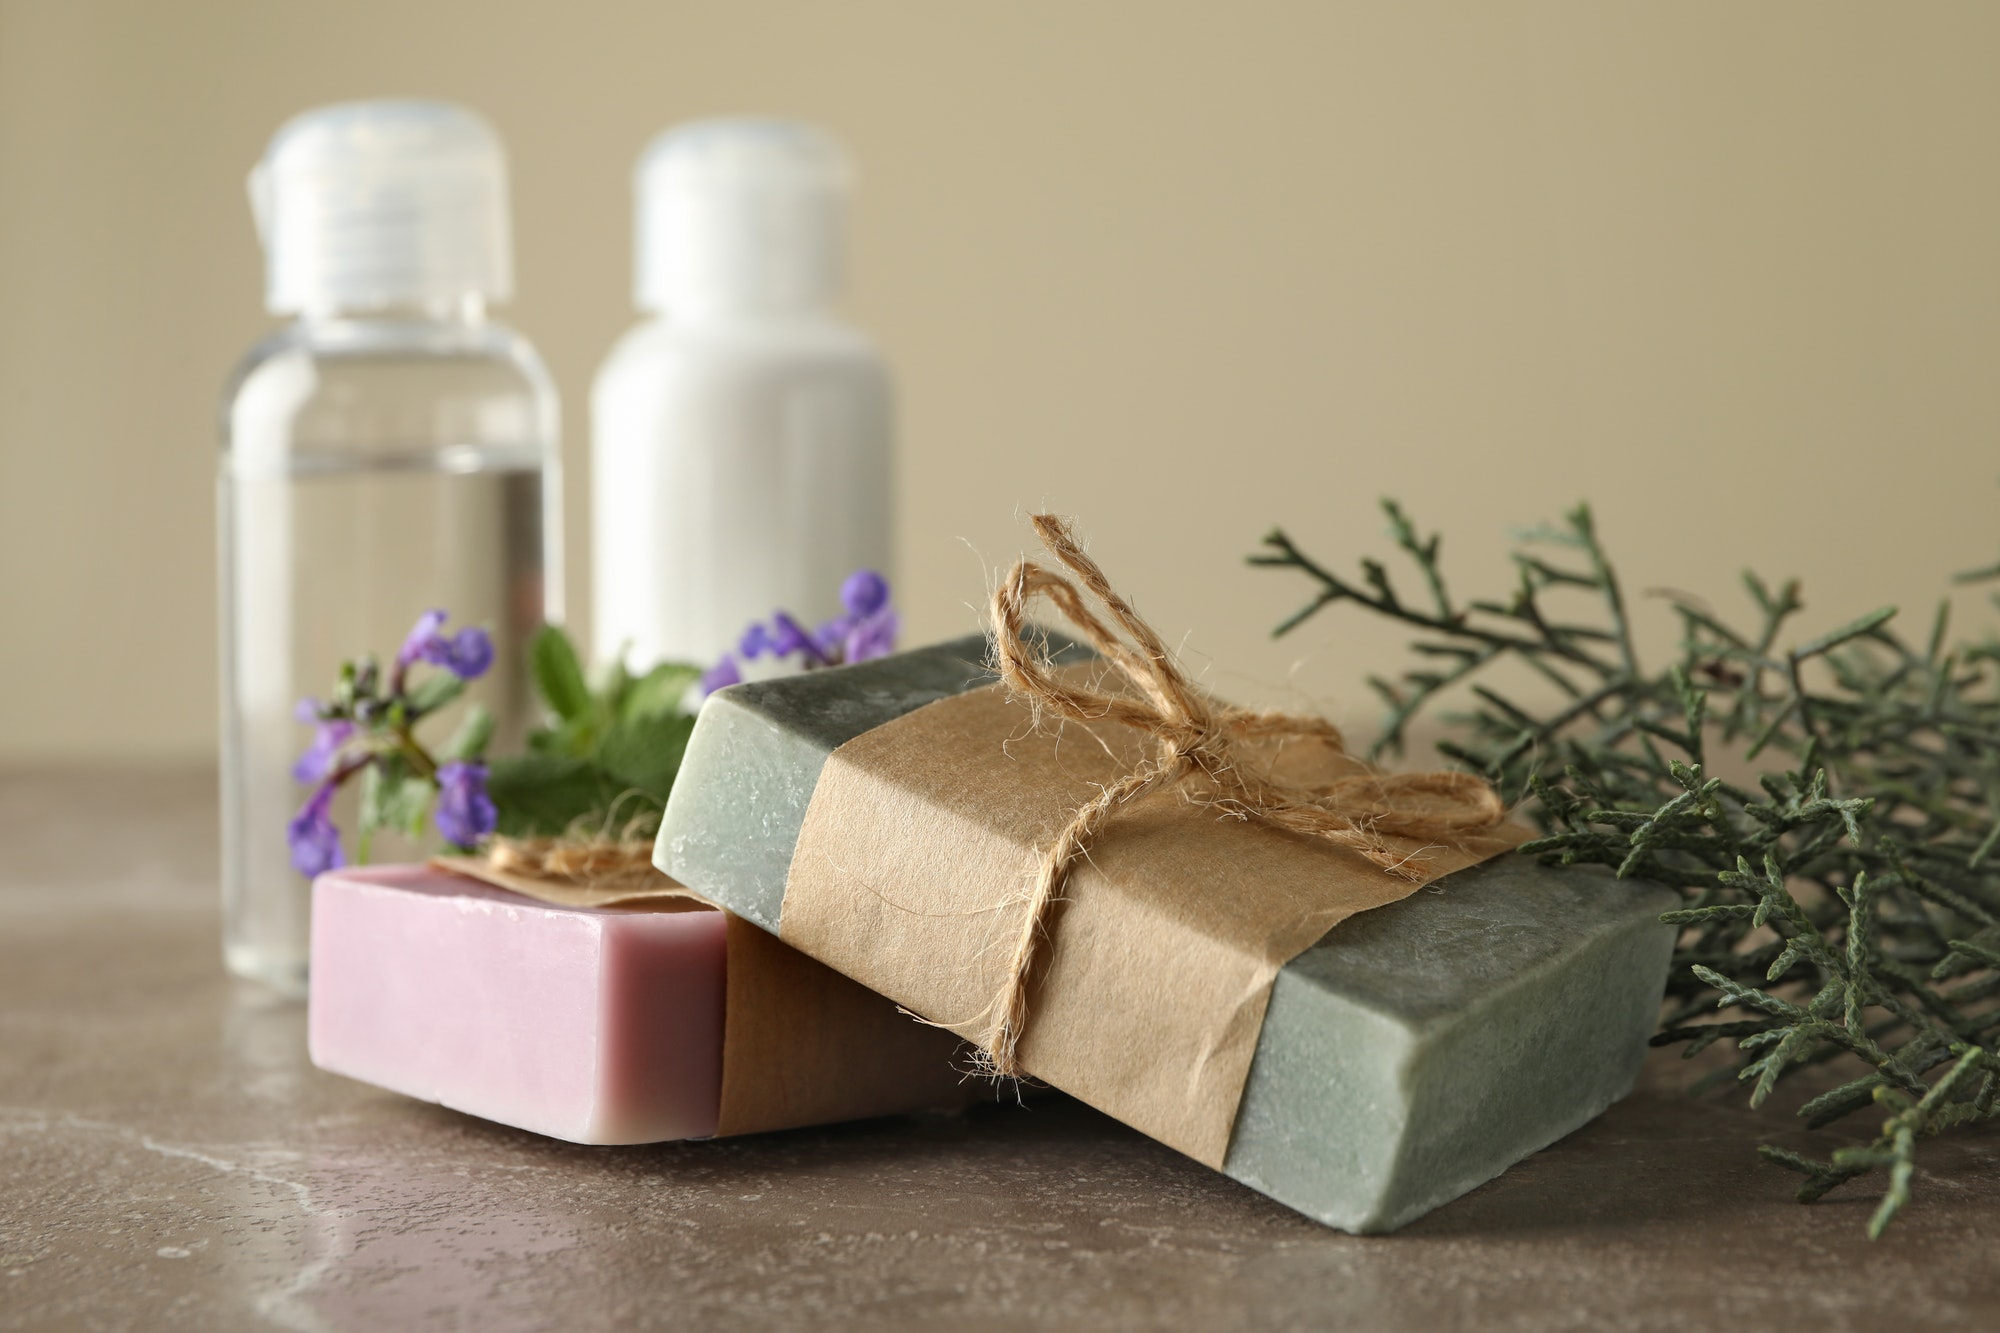 pieces-of-natural-handmade-soap-on-gray-table.jpg